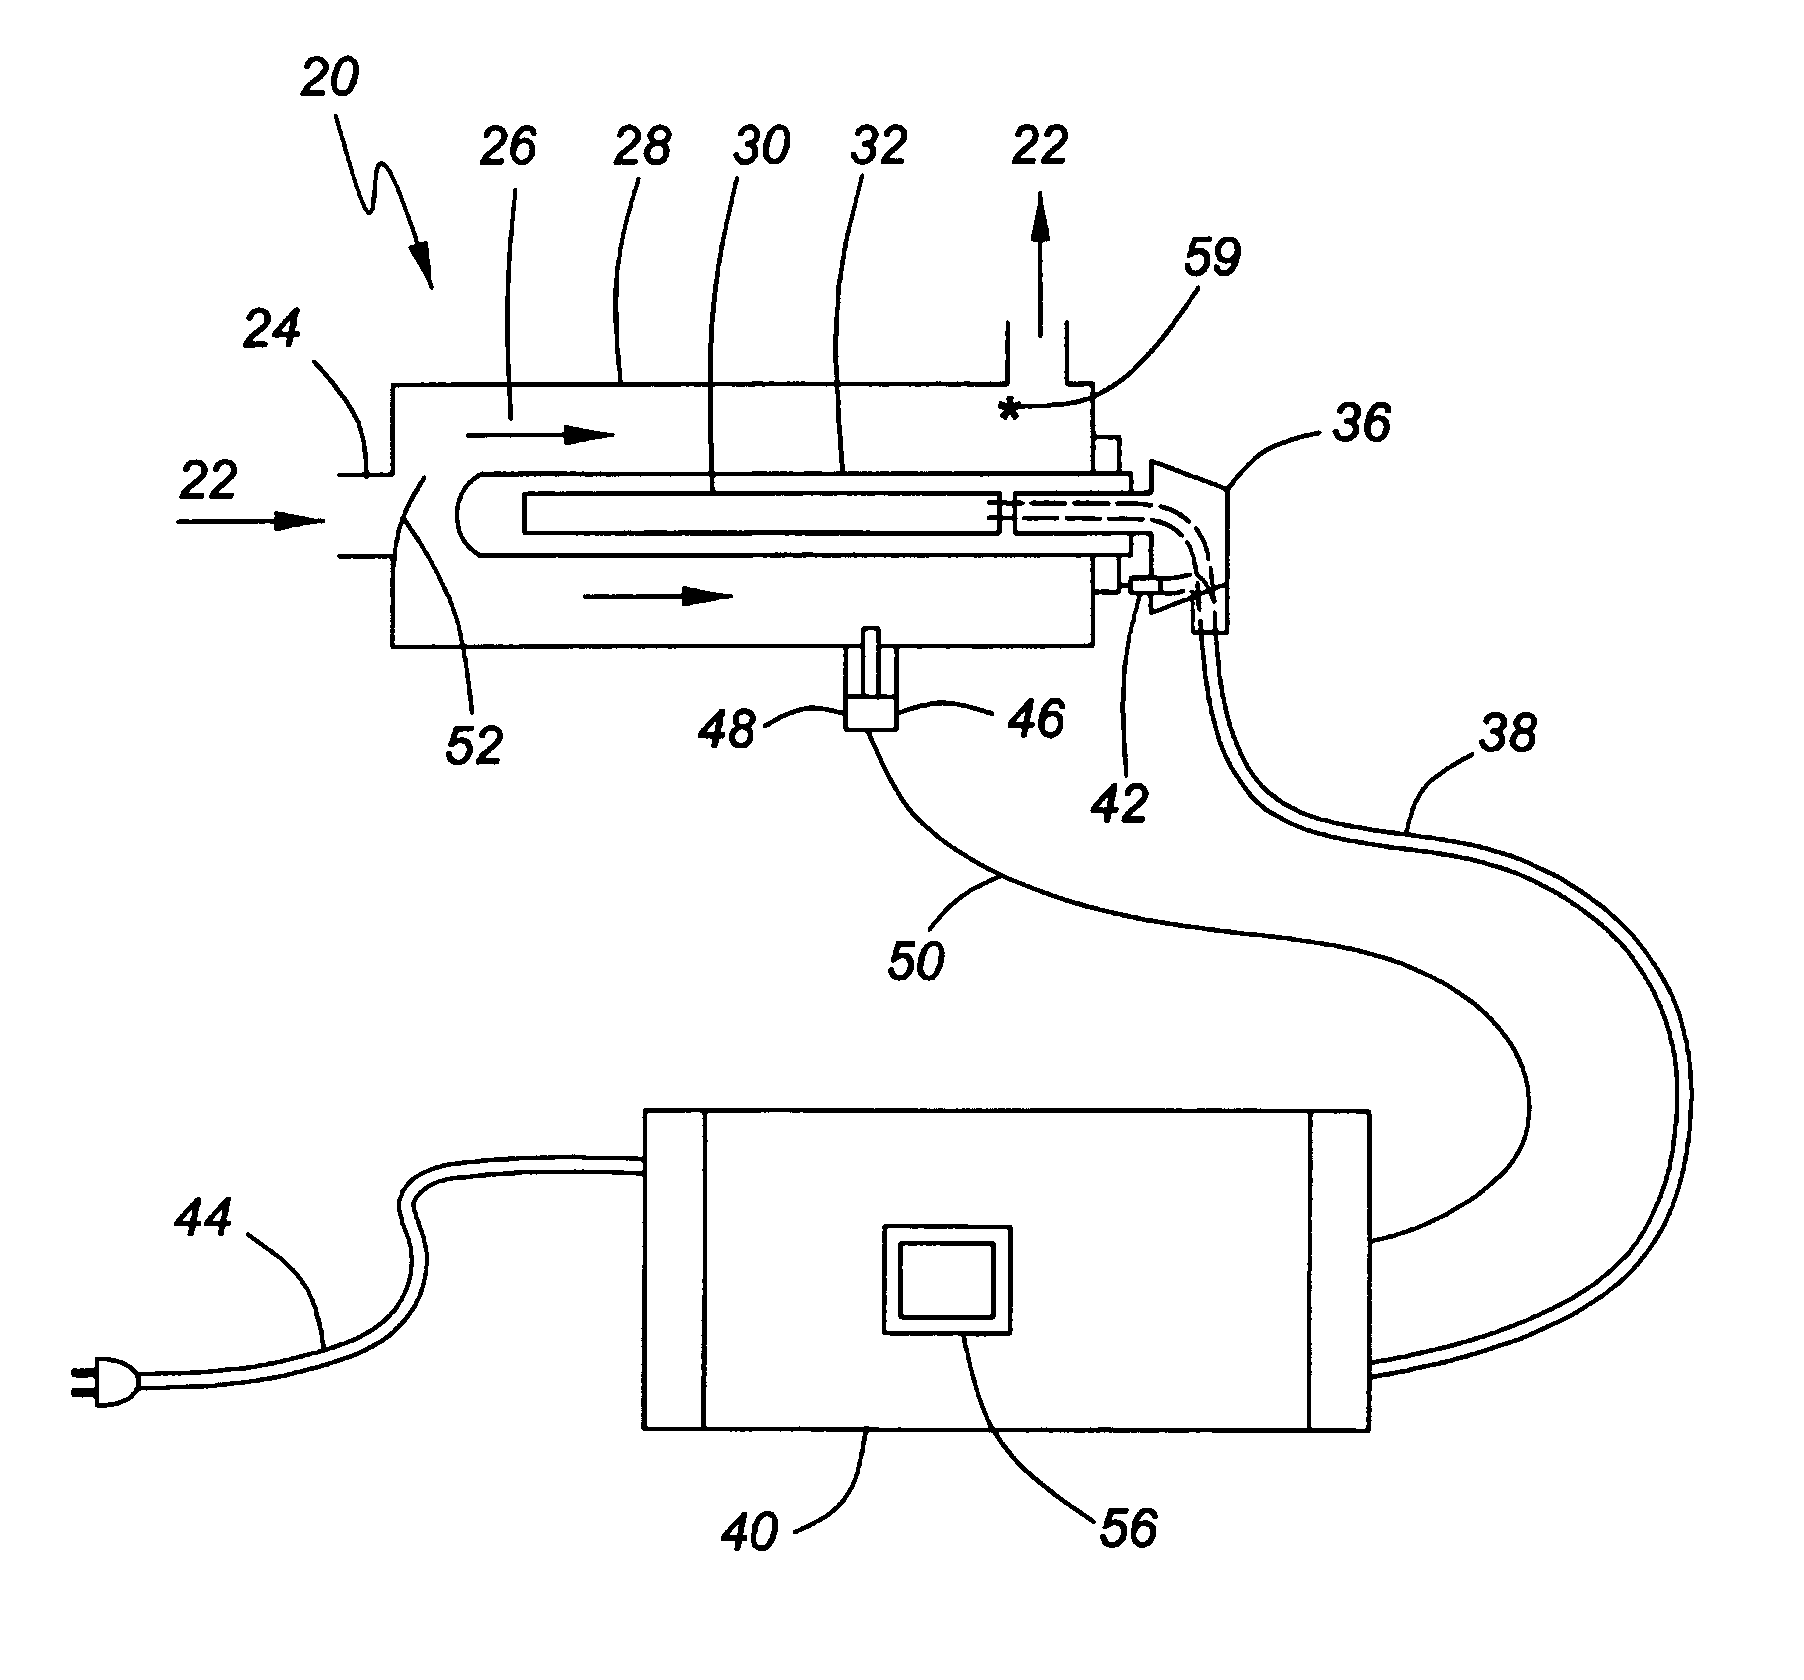 Fluid treatment system with UV sensor and intelligent driver